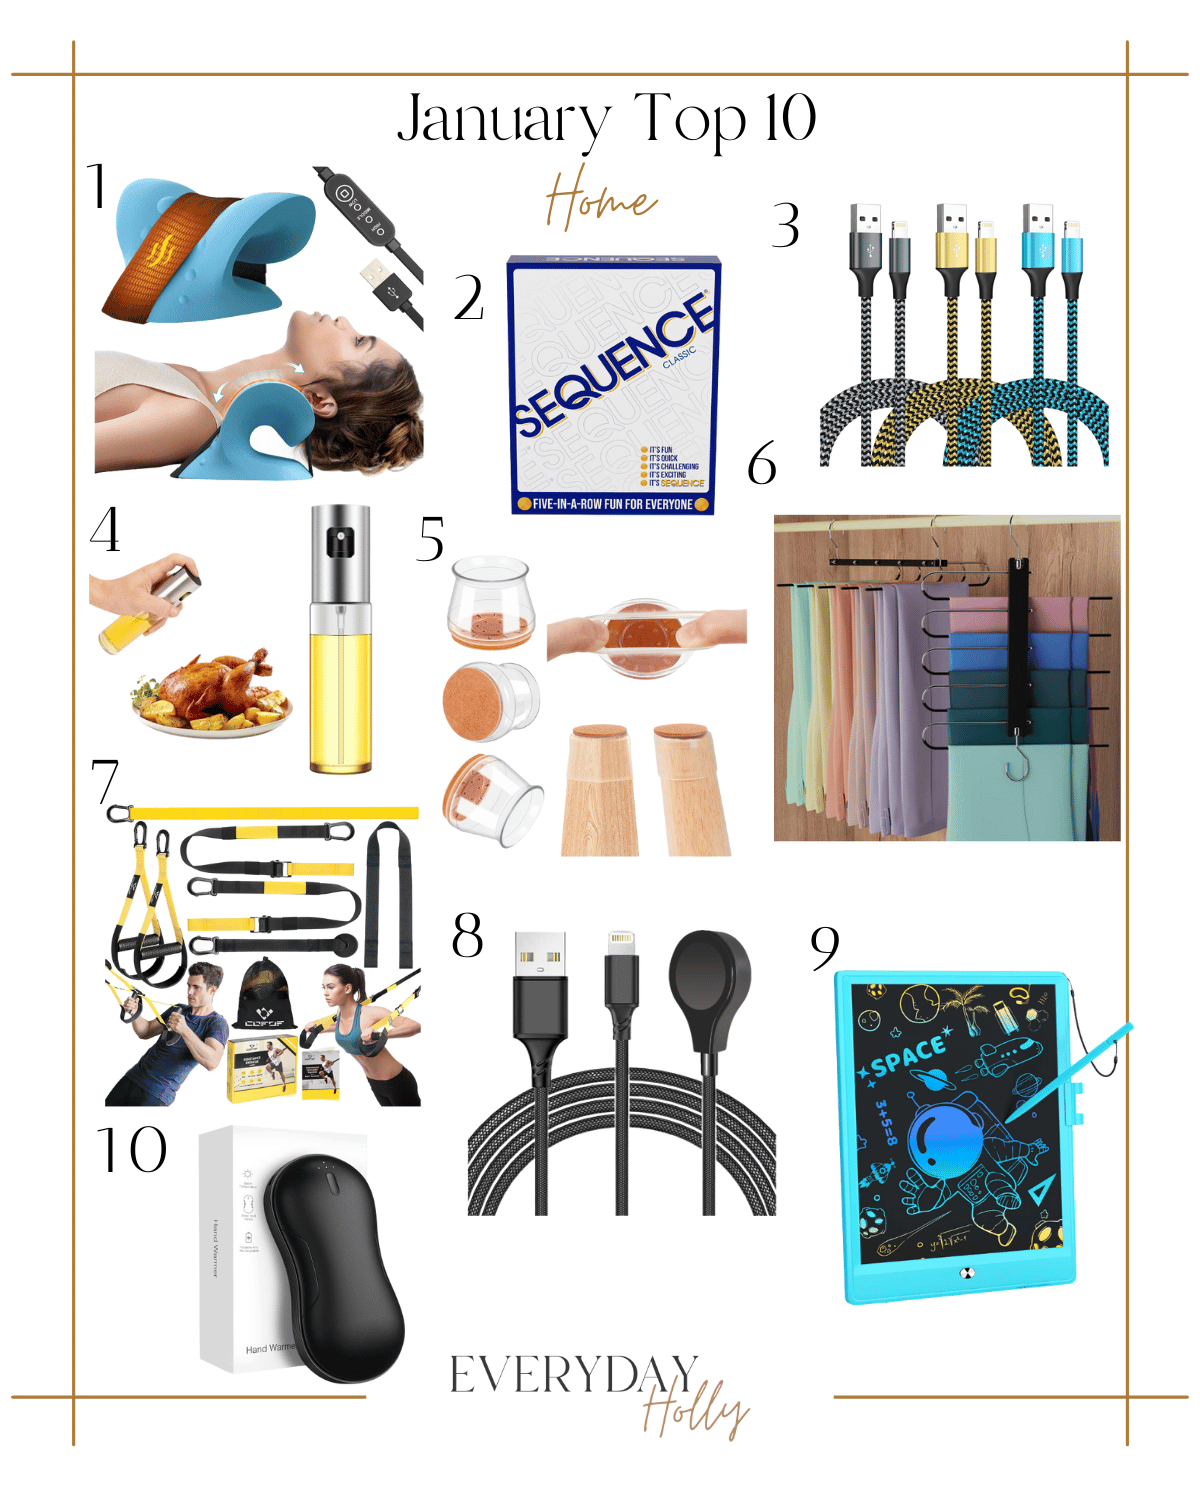 top 10 home items, january top home items, neck stretcher, sequence card game, iphone chargers, olive oil spray, chair leg protectors, hanging organizers, weight workout bands, multipurpose charger, kids drawing tablet, hand warmer 